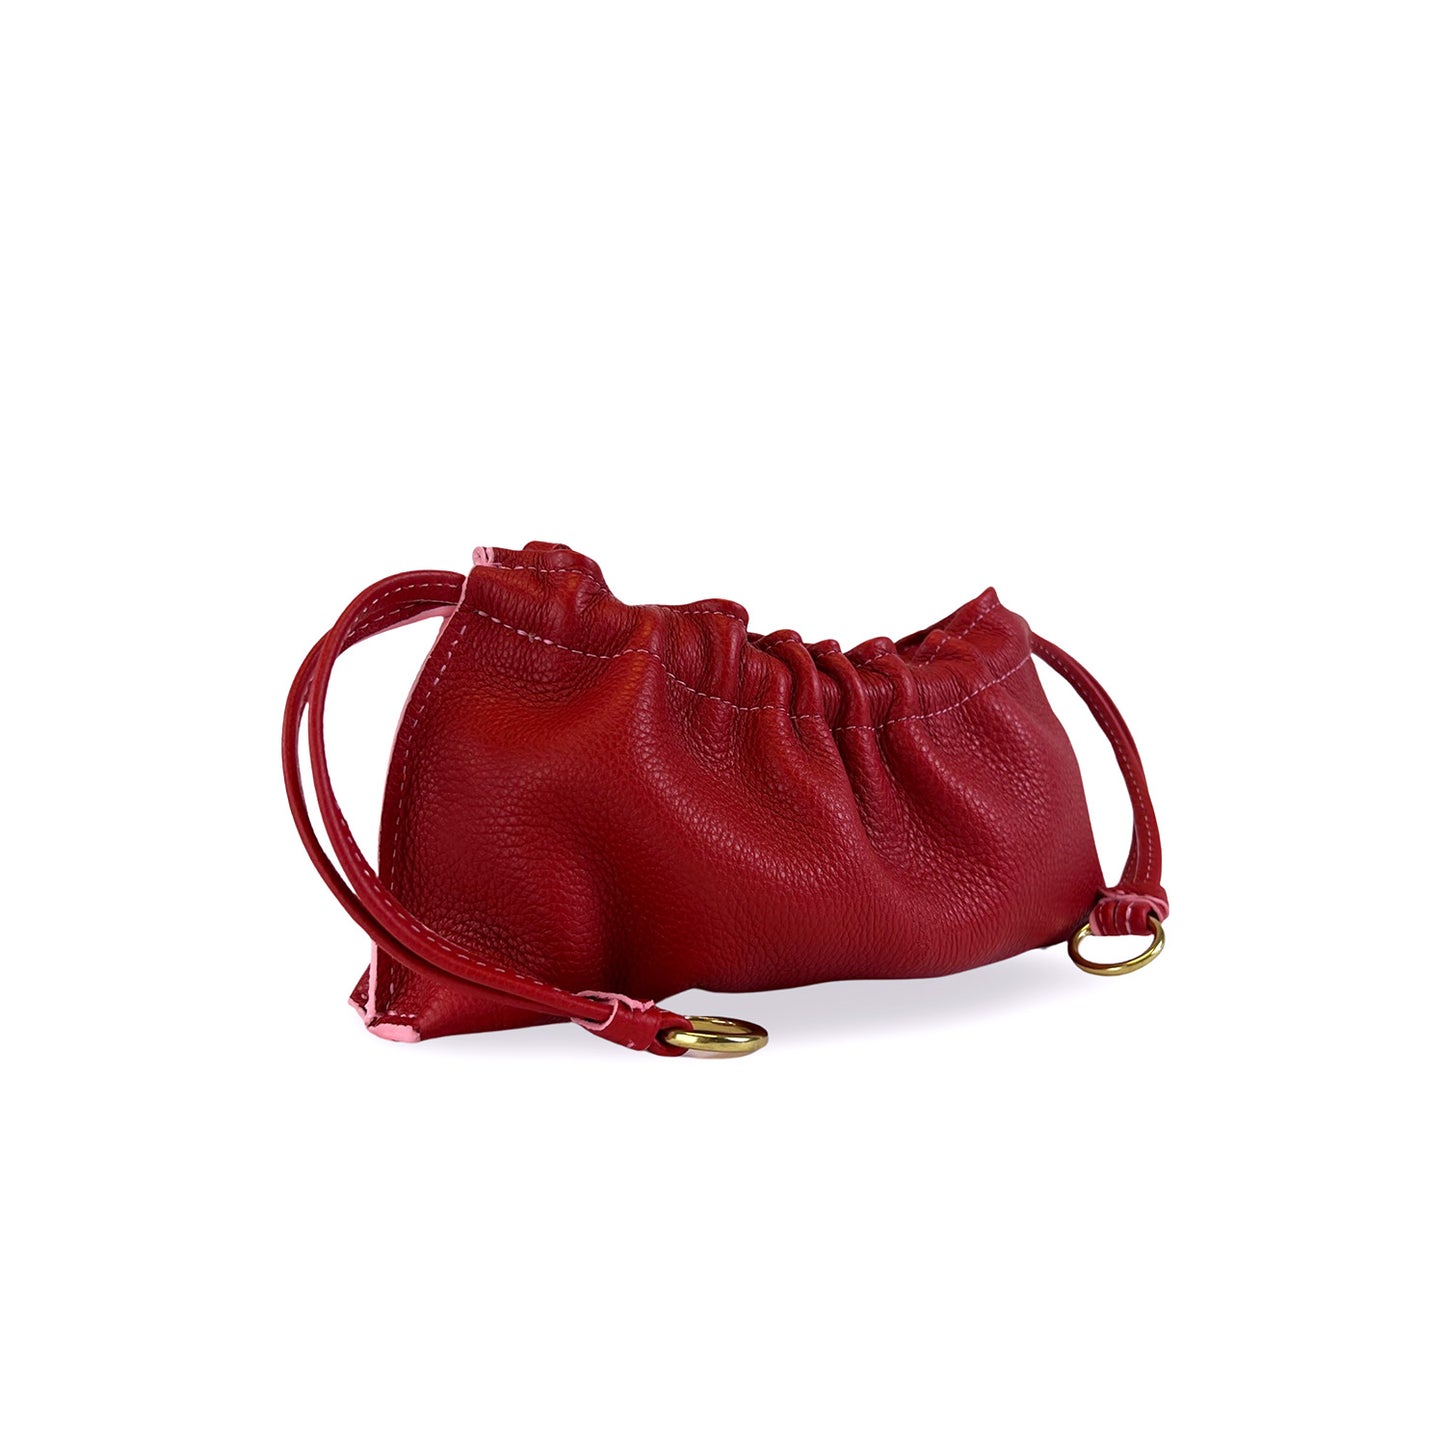 Honeymouth x Where is Frances Cardi Convertible Clutch- Pomegranate